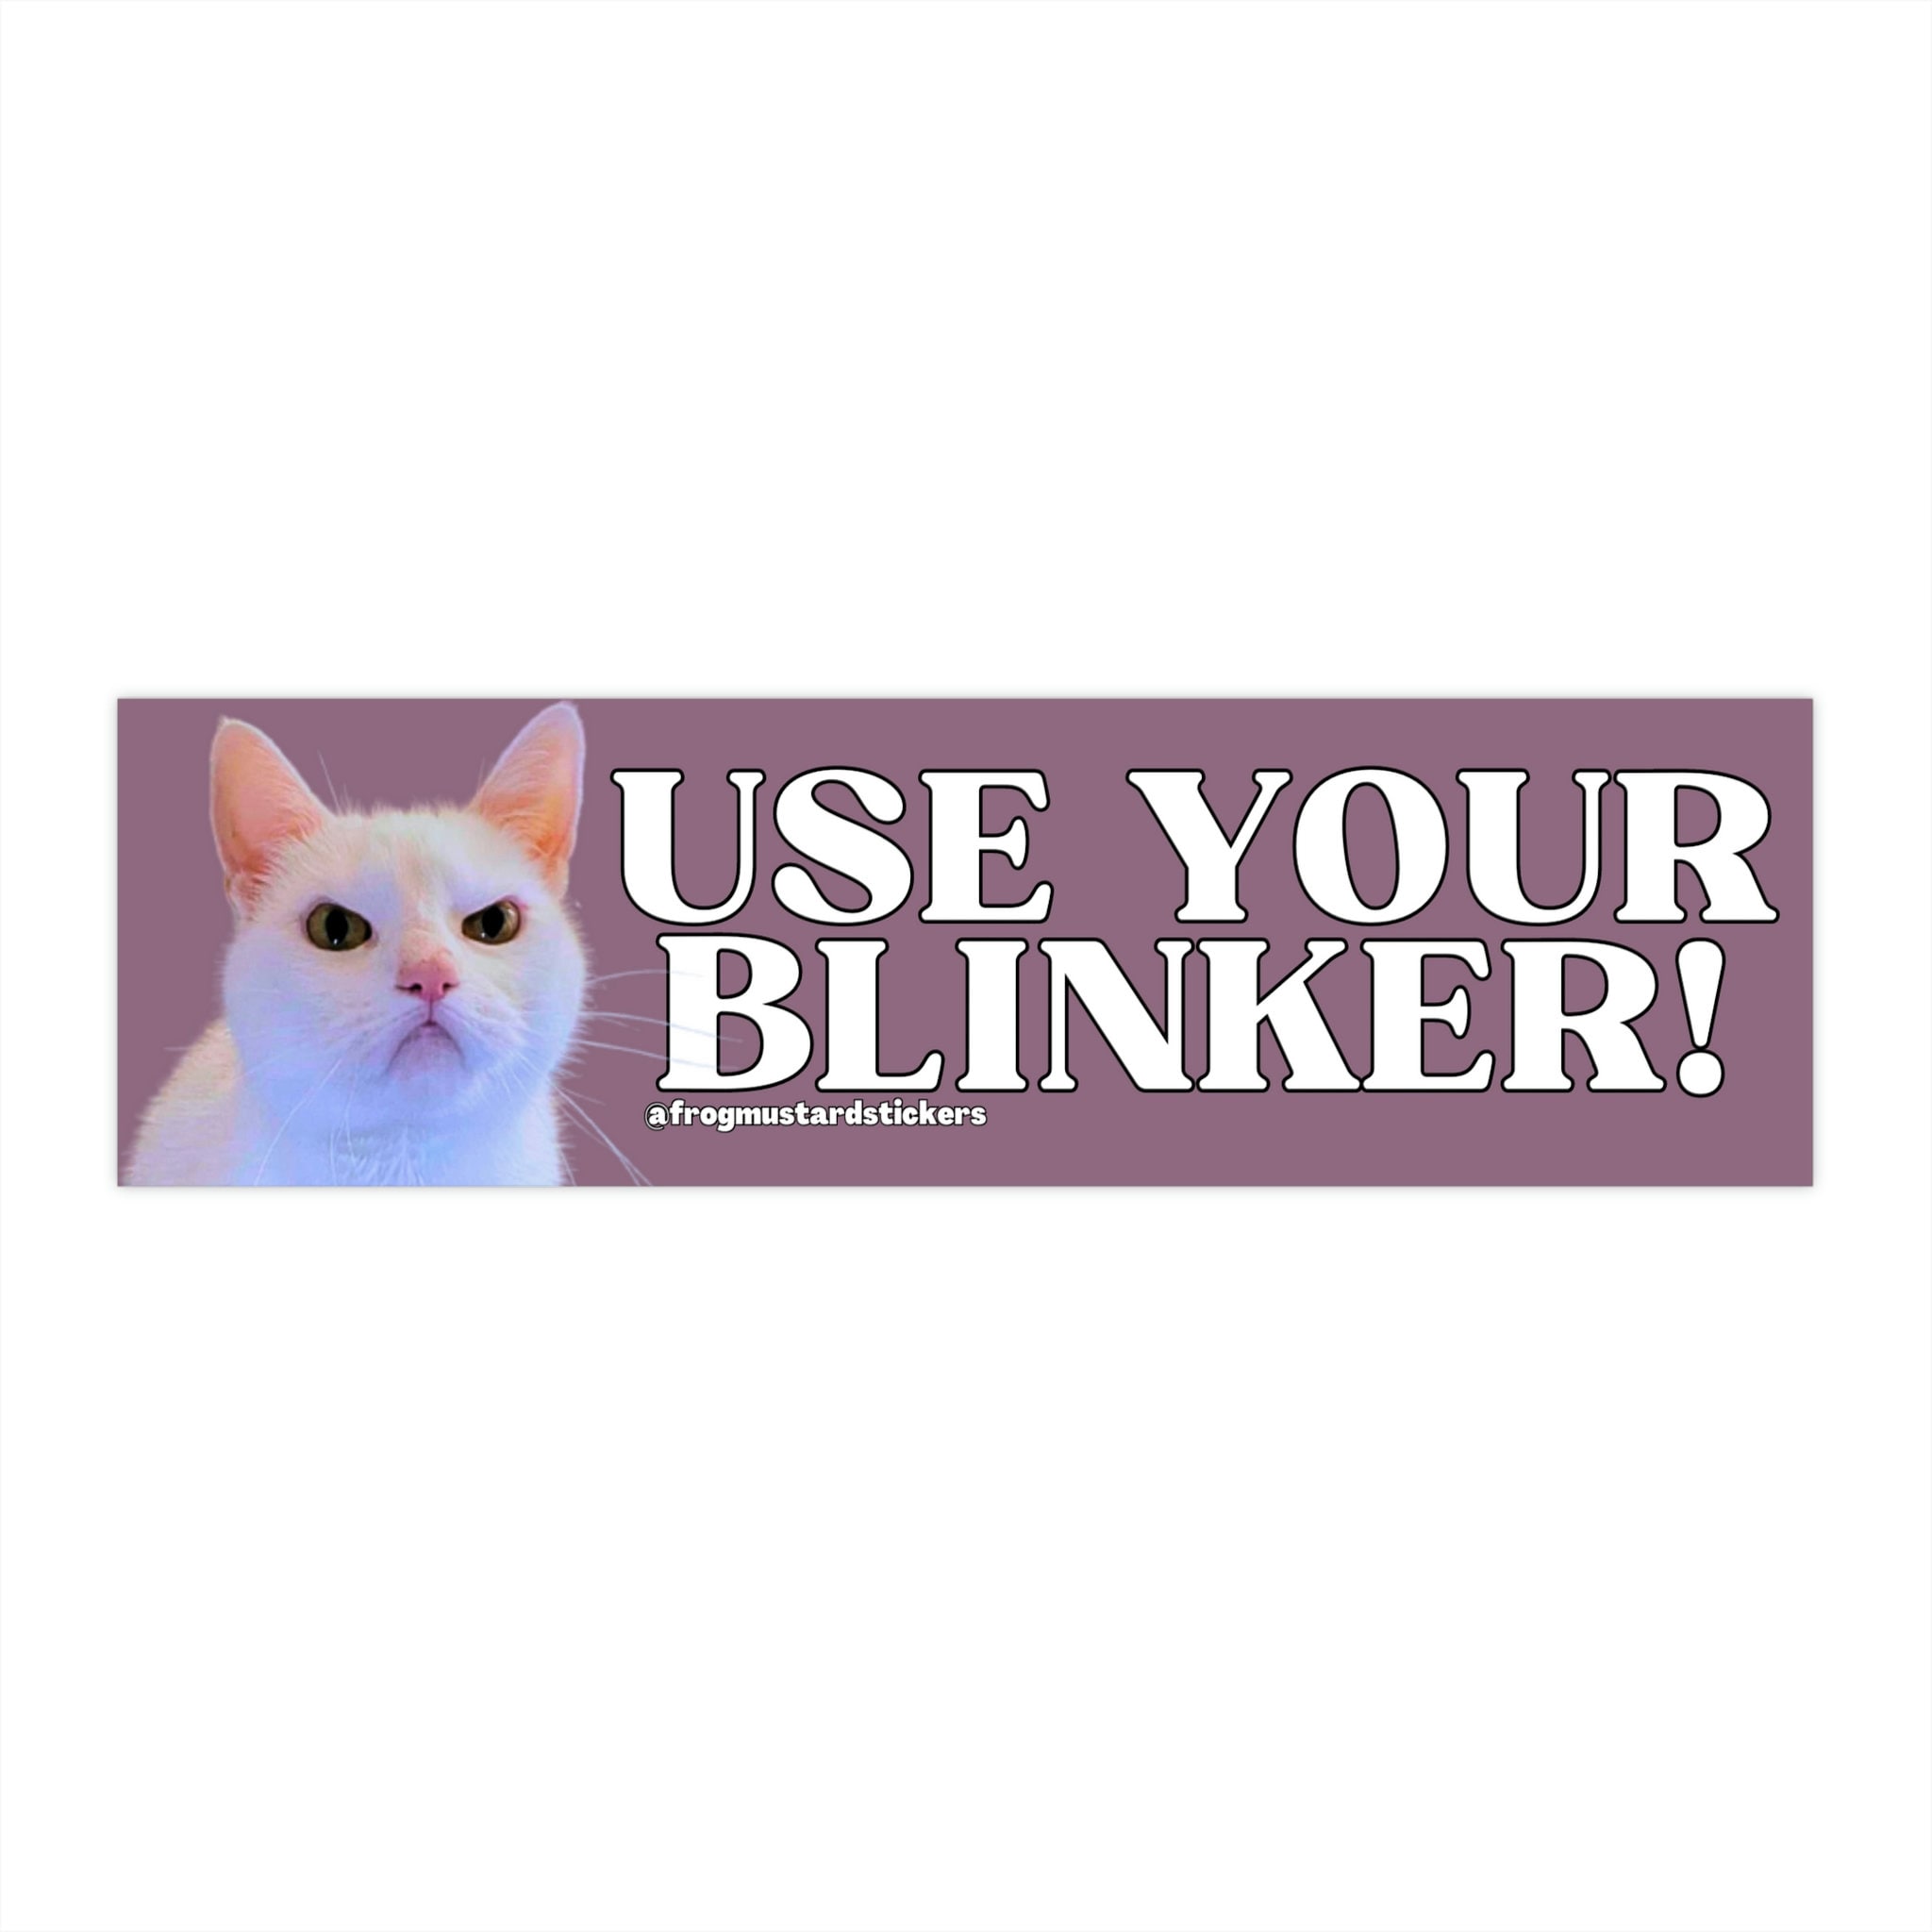 Are Blinkers Bad For You? – Cloud Cat